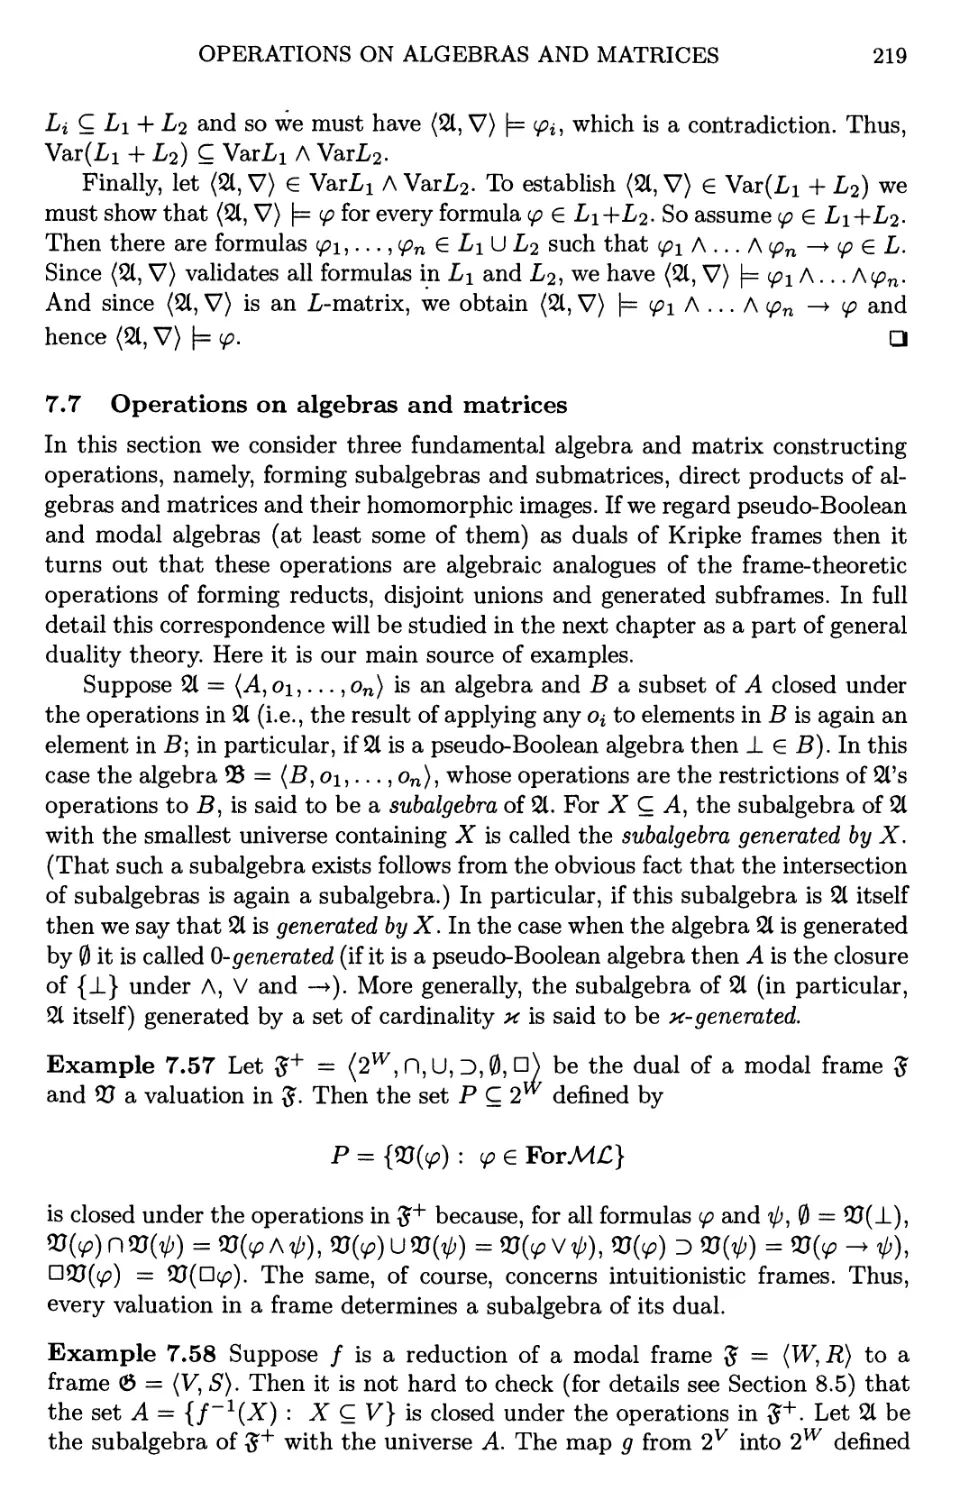 7.7 Operations on algebras and matrices